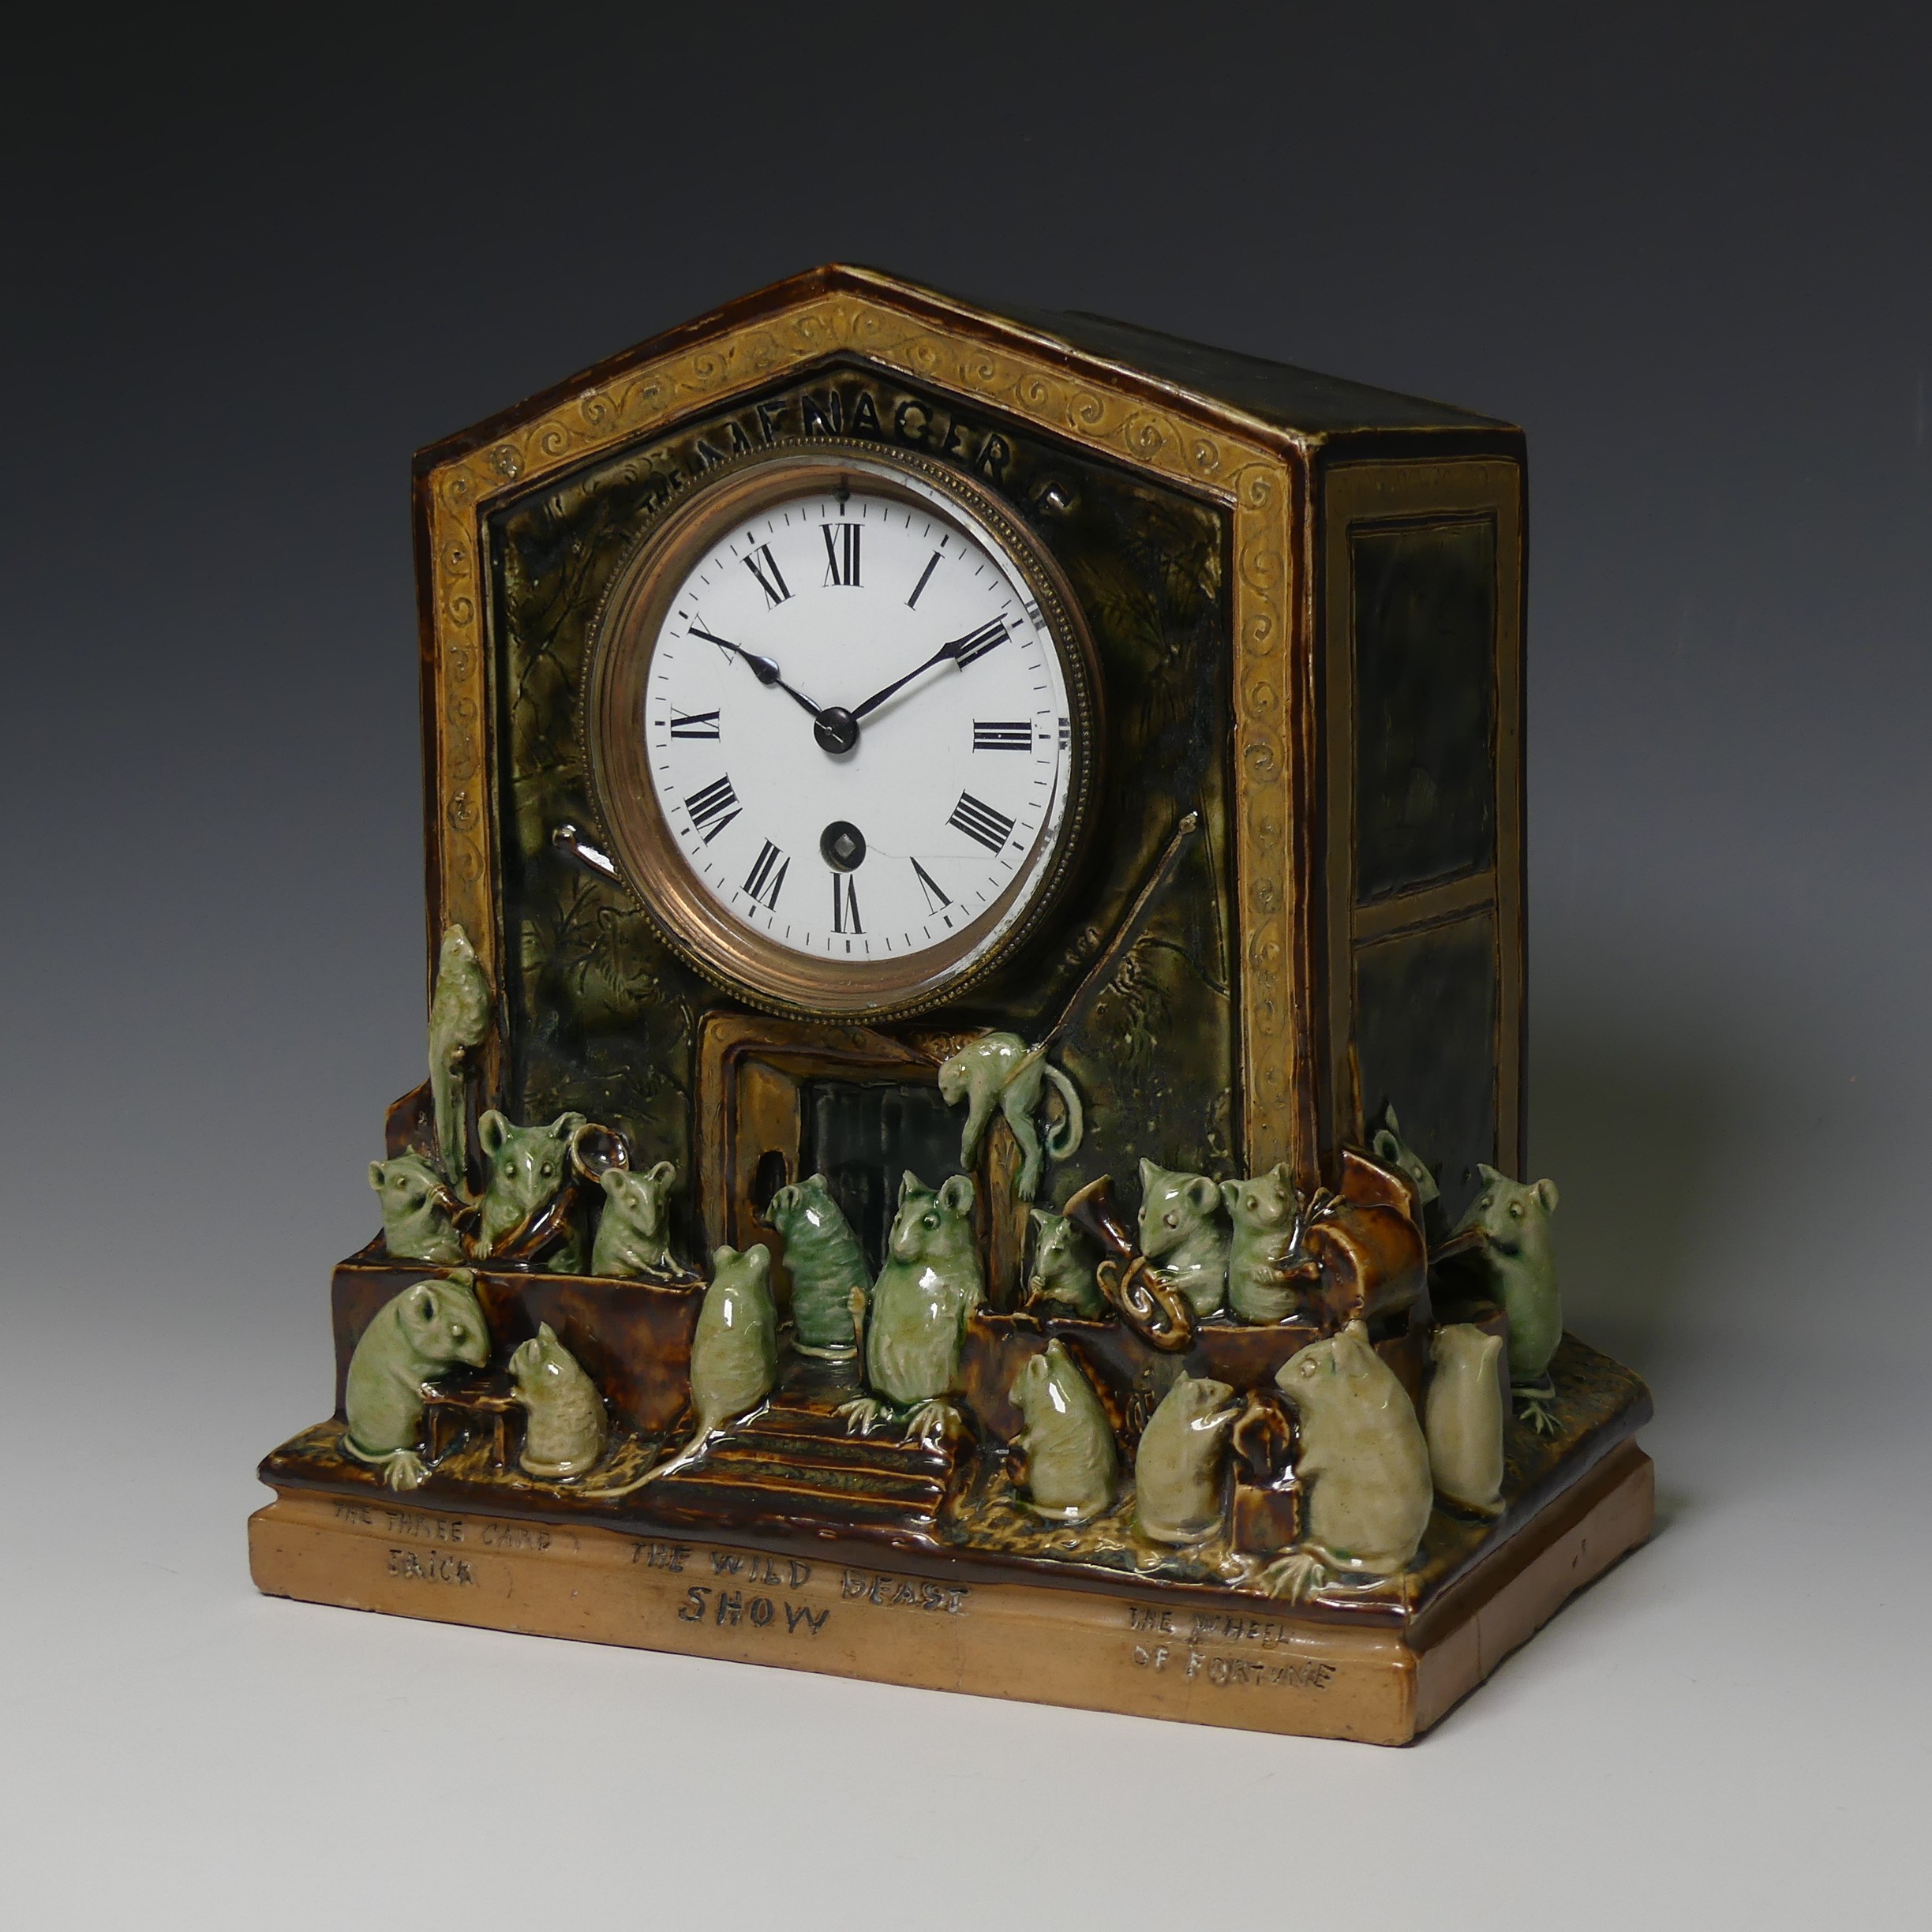 George Tinworth (1843-1913) for Doulton Lambeth; The 'Menagerie' Clock, c.1885. A very rare and fine